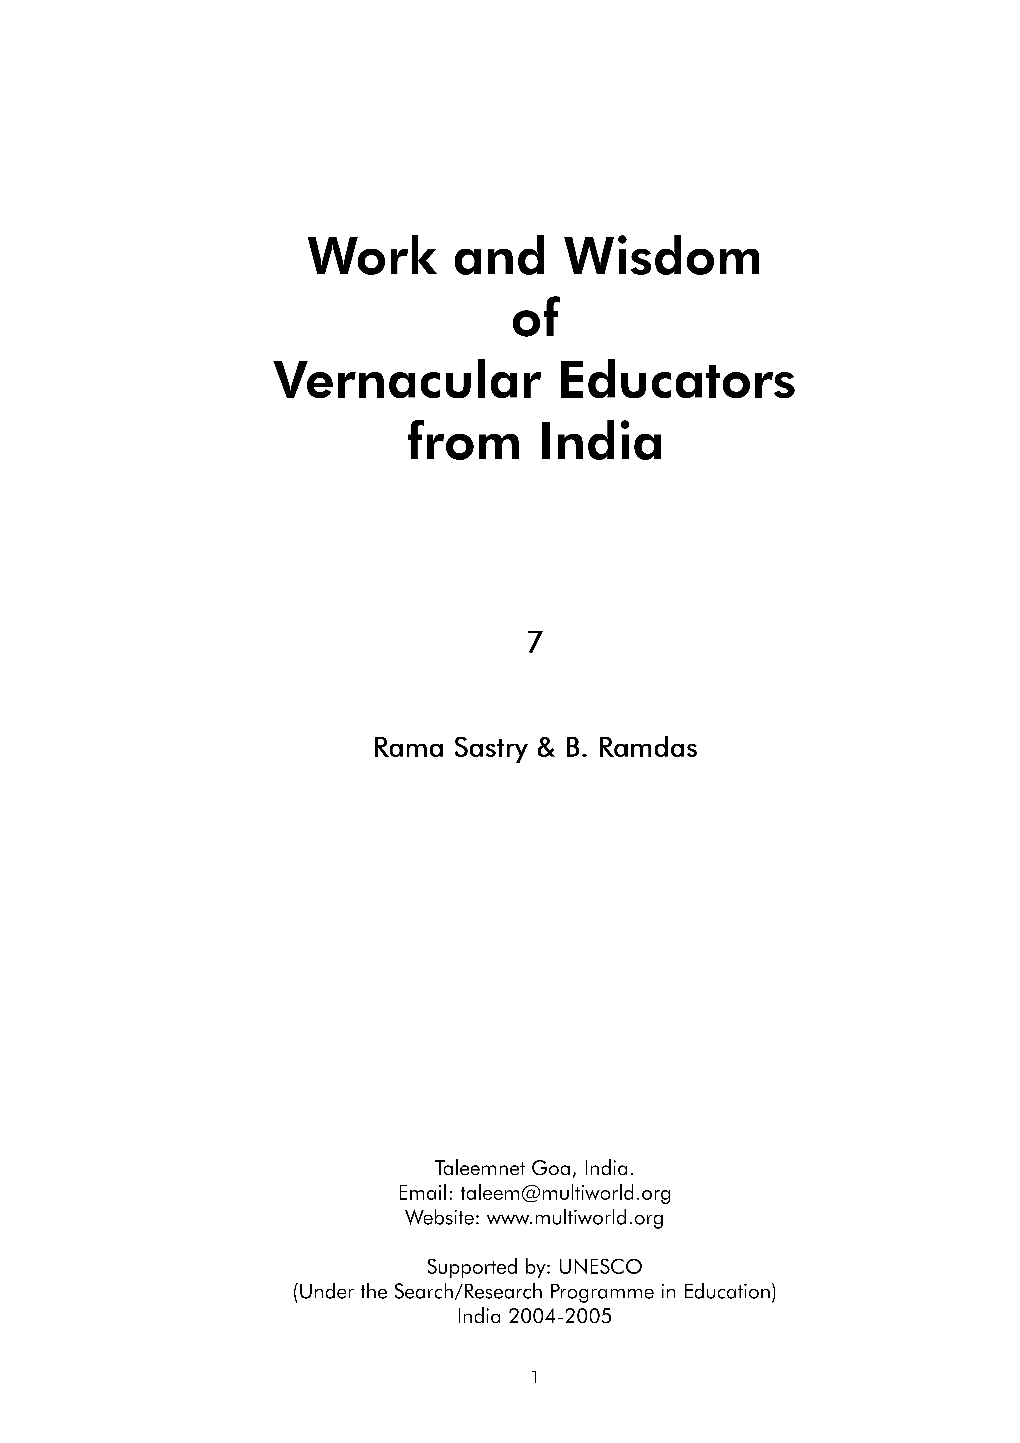 Work and Wisdom of Vernacular Educators from India 7